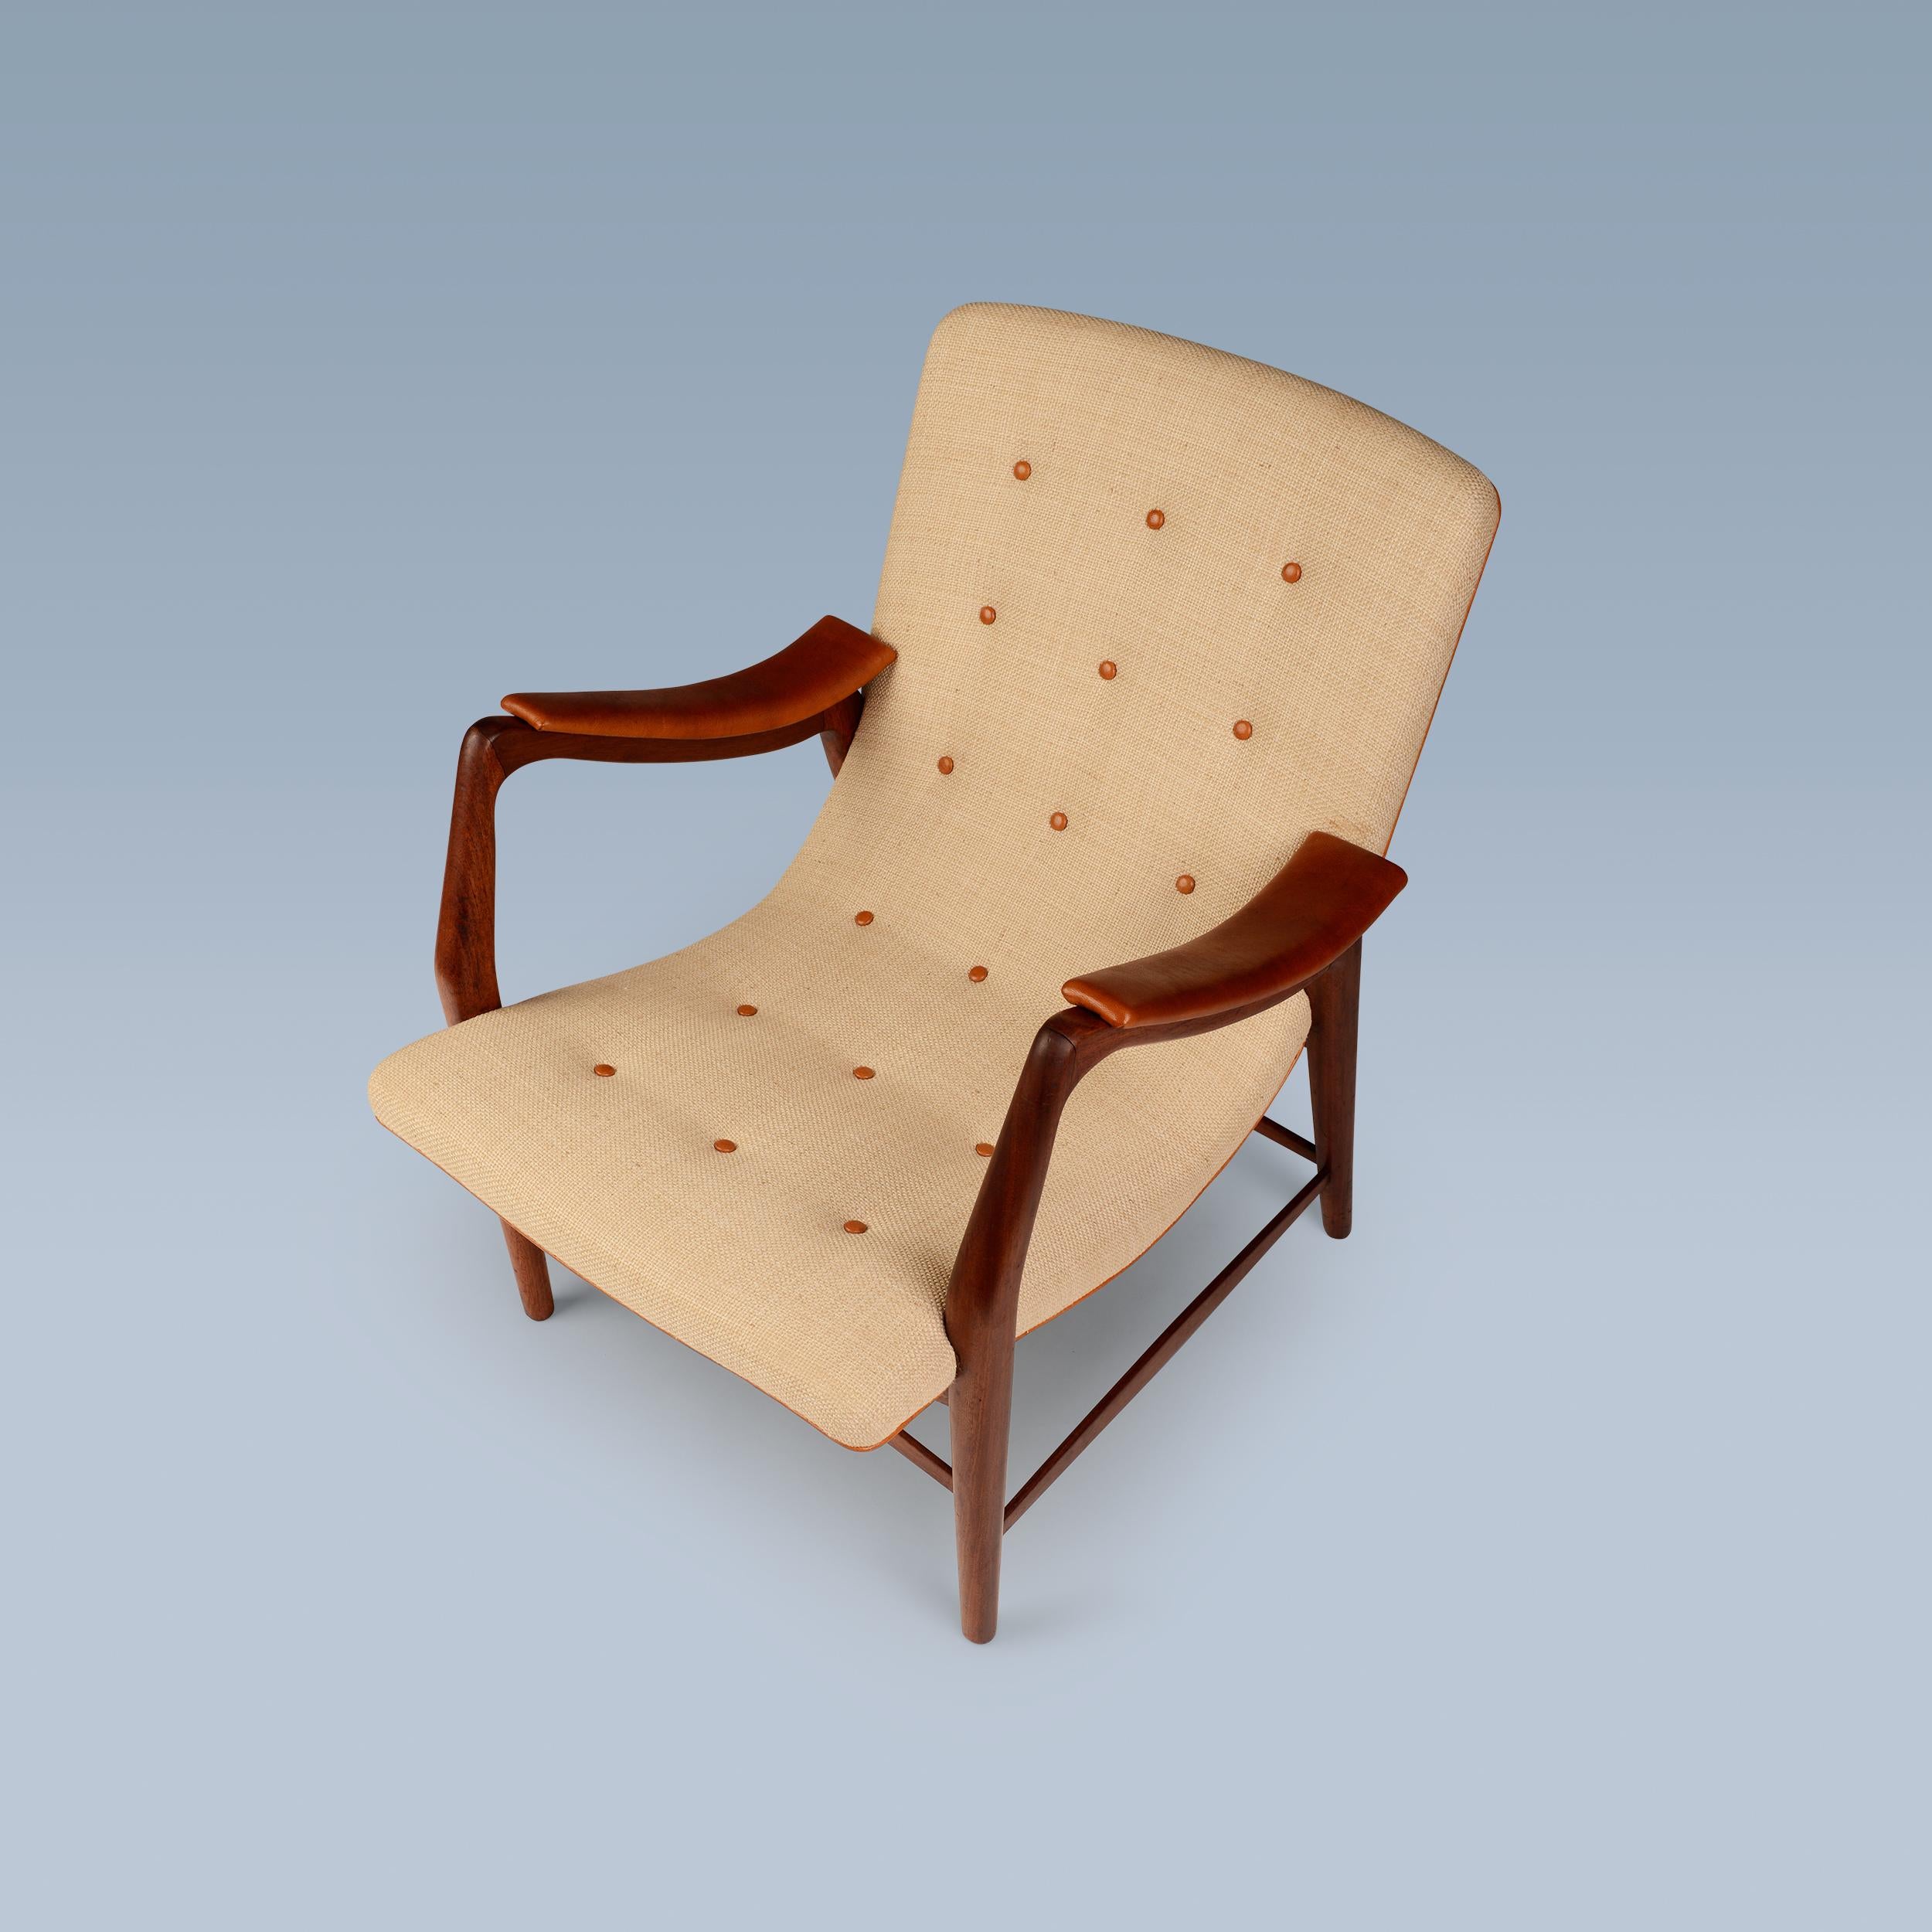 This rare teak easy chair has a curvy seat and the back is upholstered with light fabric. Its armrests, piping and buttons on the back are fitted with Niger leather.

The chair was designed early in 1947 by Arne Hovmand-Olsen (1919-1989) and